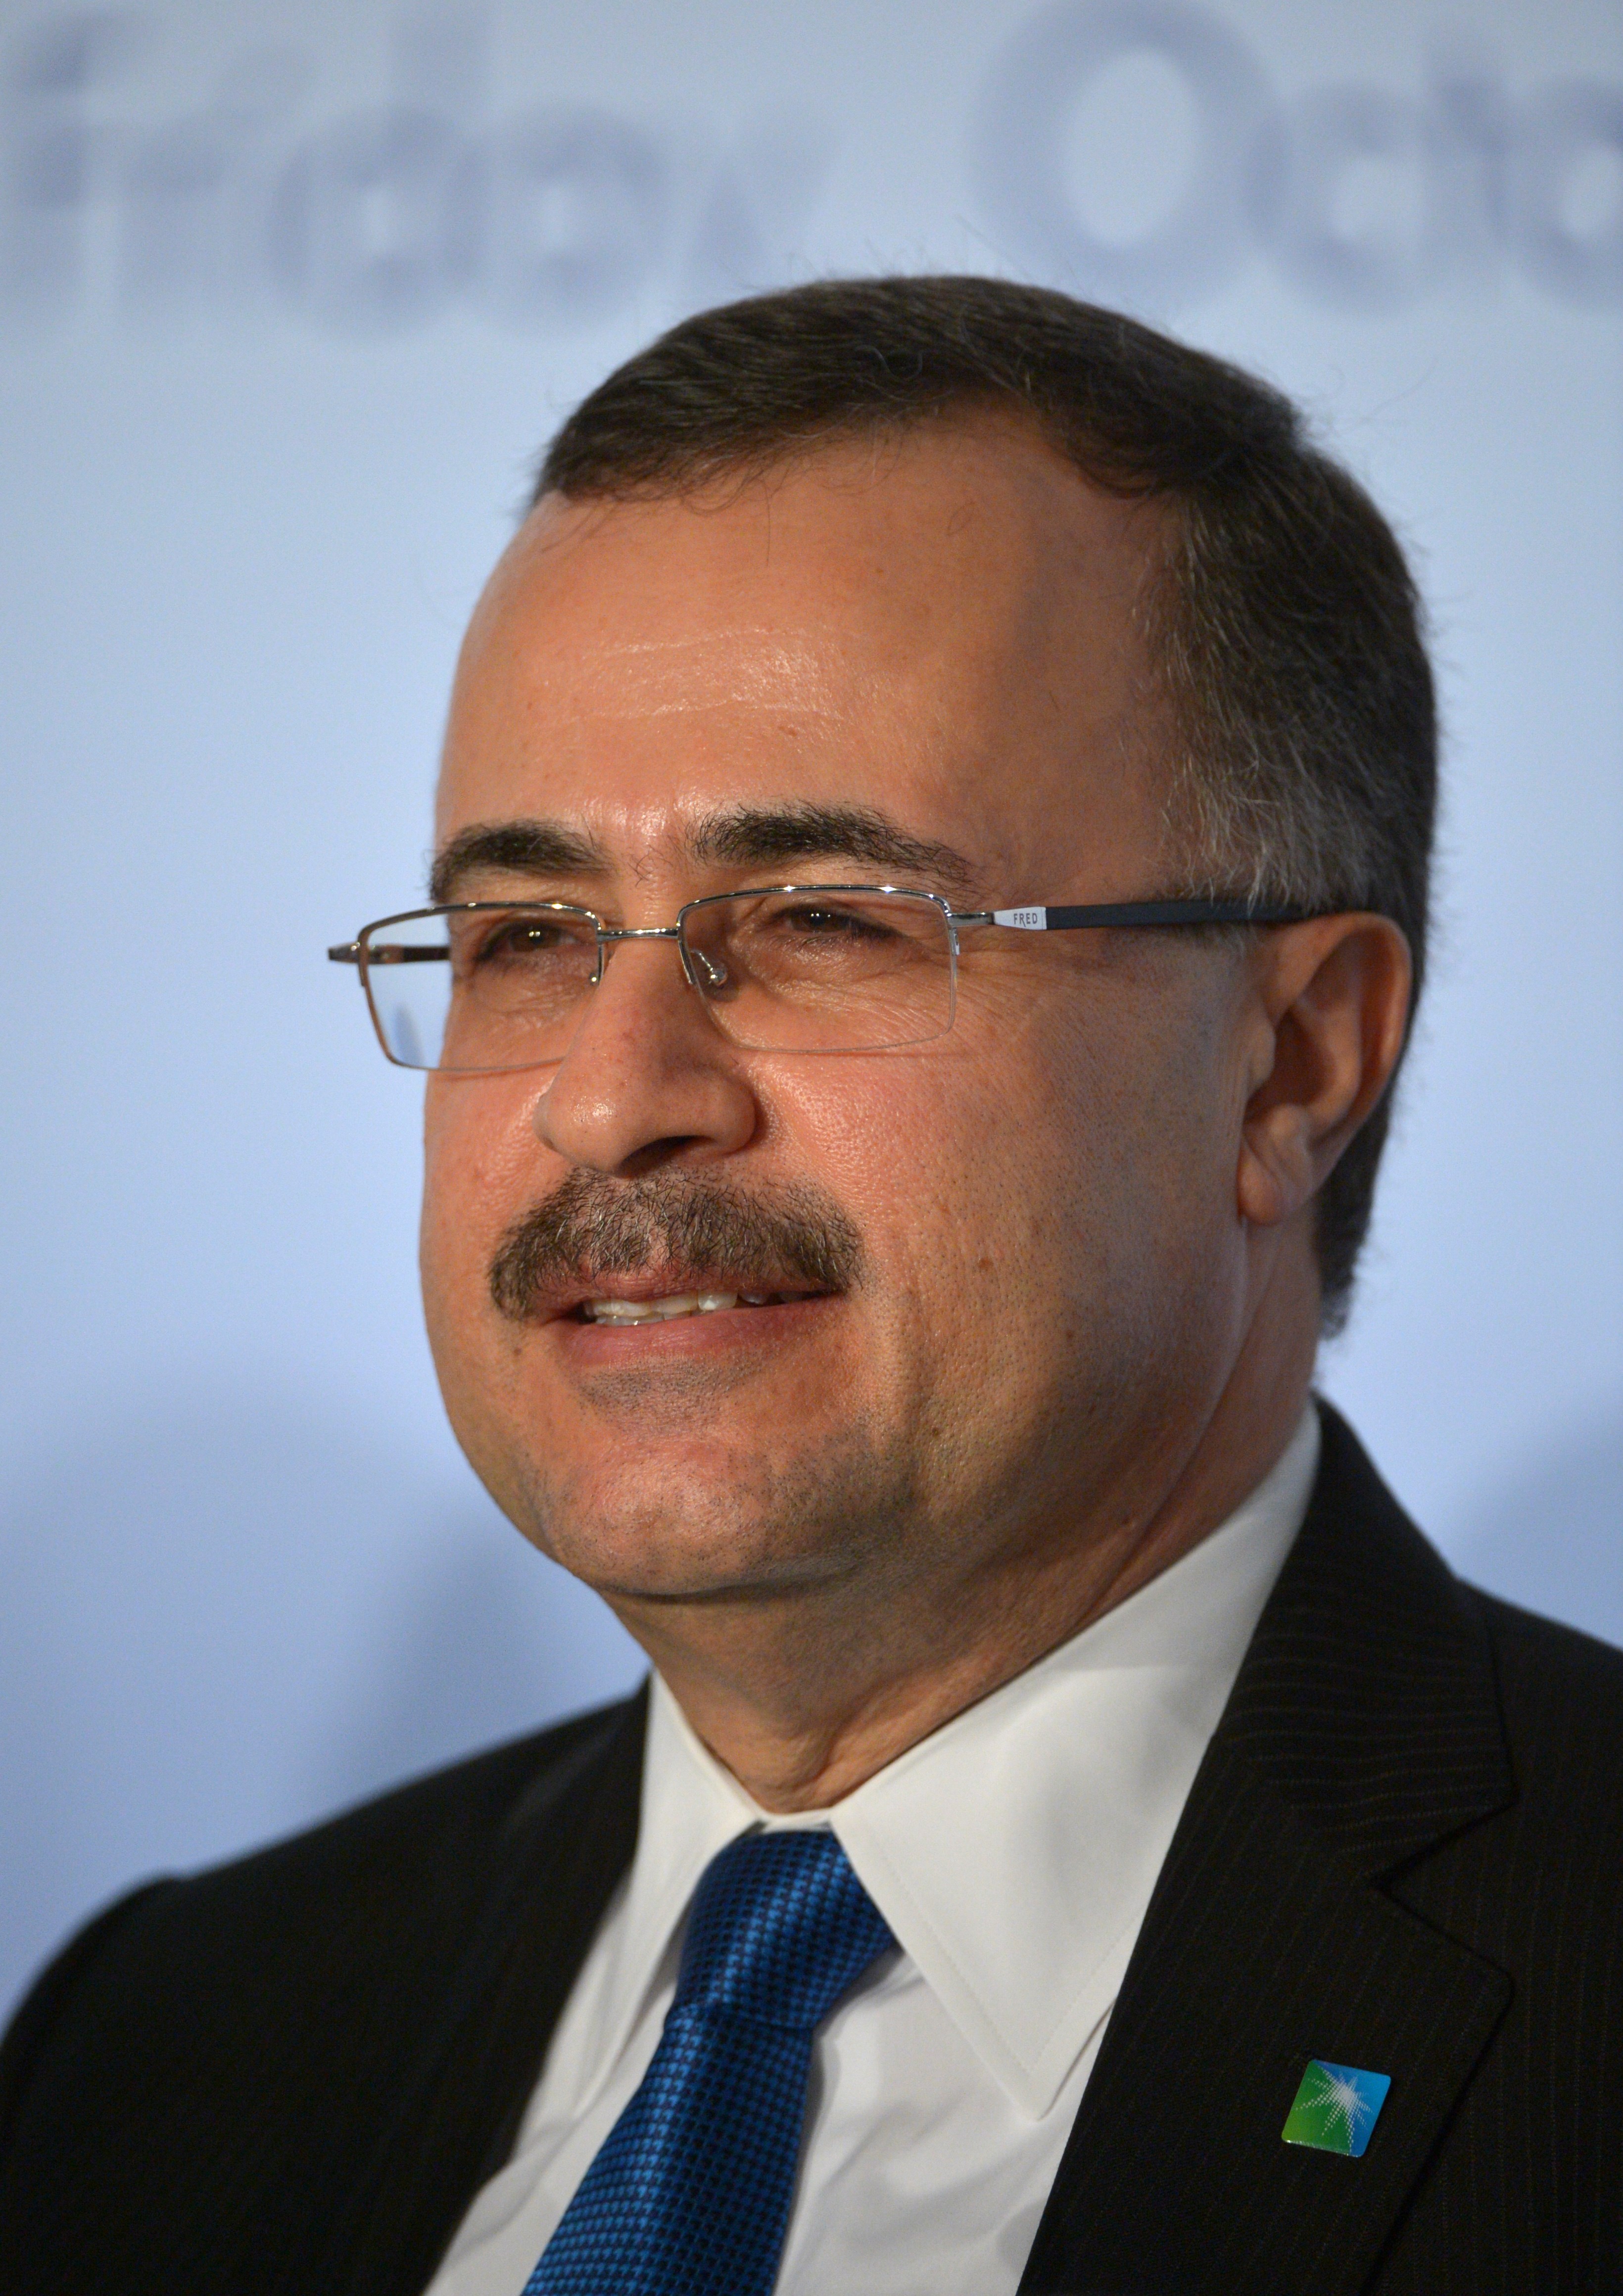 Saudi Aramco CEO Amin Nasser at a meeting of the Oil and Gas Climate Initiative (OGCI) in Paris on Oct. 16, 2015. (Eric Piermont—AFP/Getty Images)